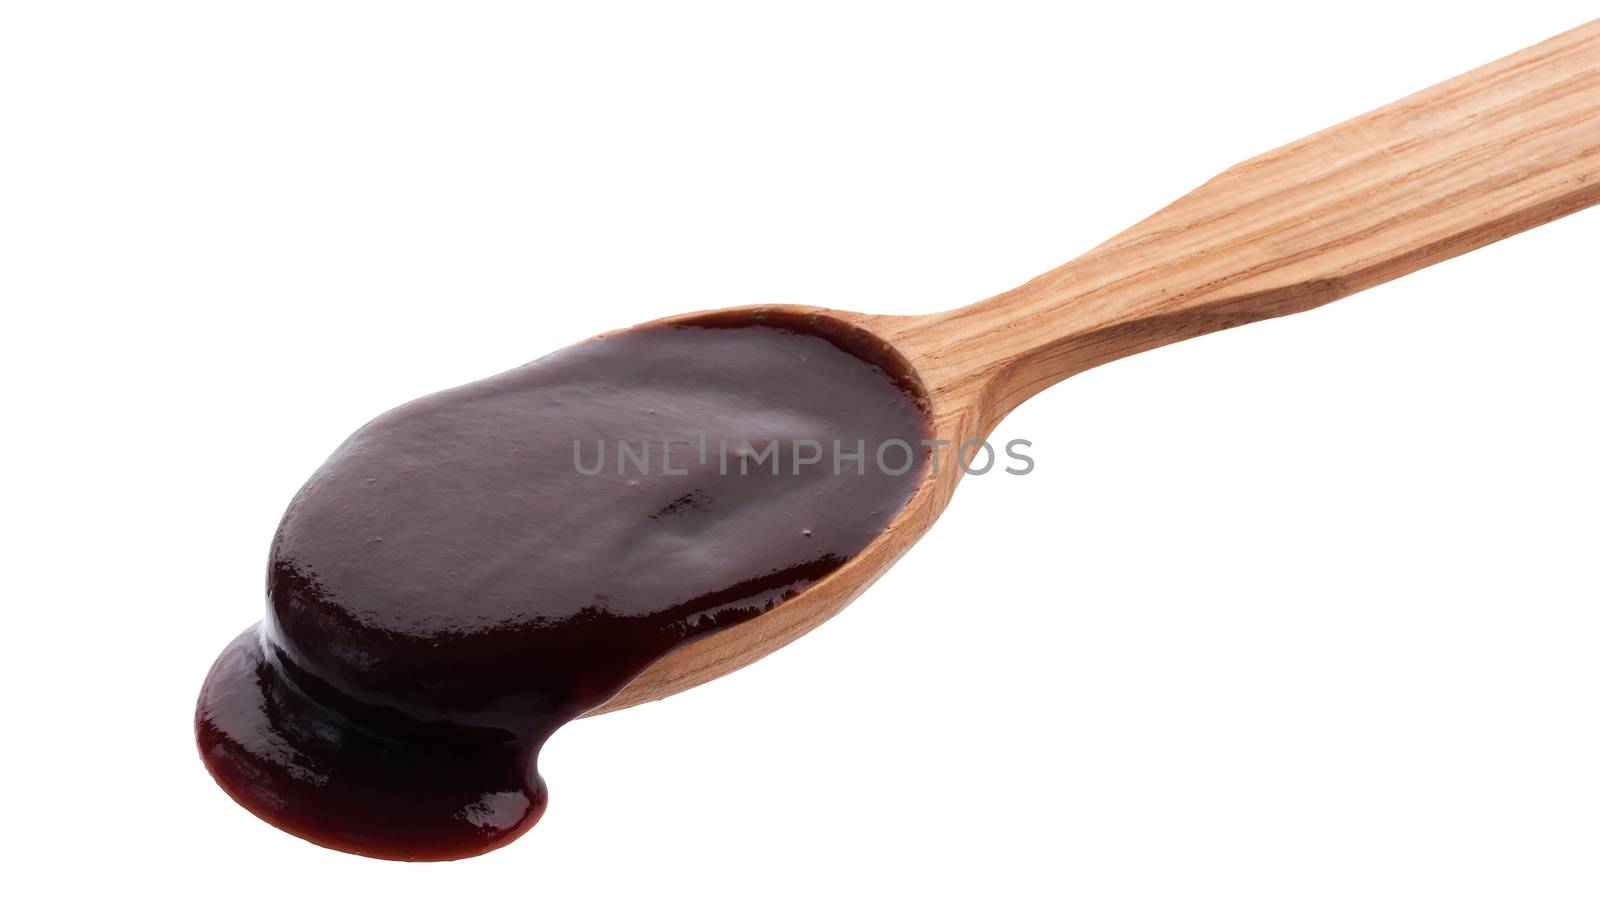 Barbecue sauce with wooden spoon isolated on white background by xamtiw